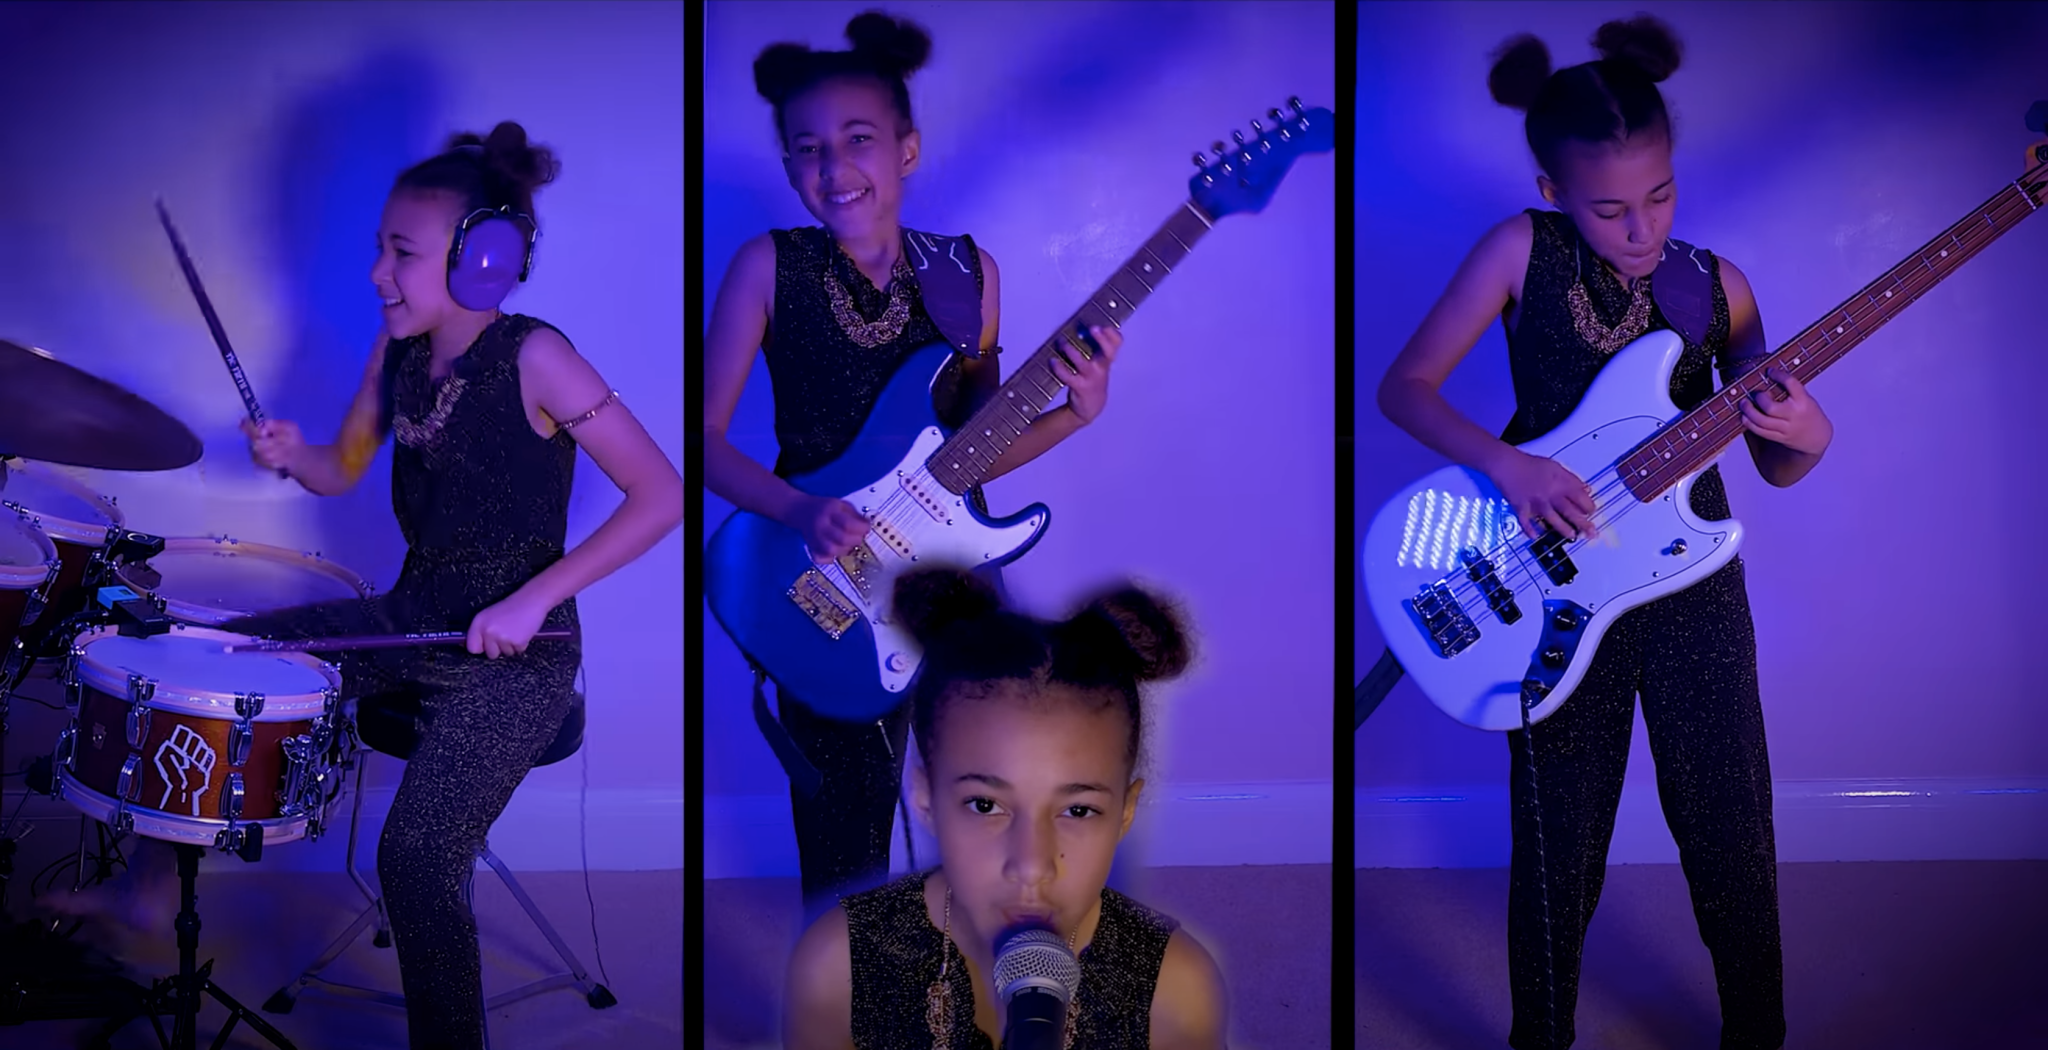 Nandi Bushell Continues Hot Streak With Cover of Muse's 'Plug In Baby'